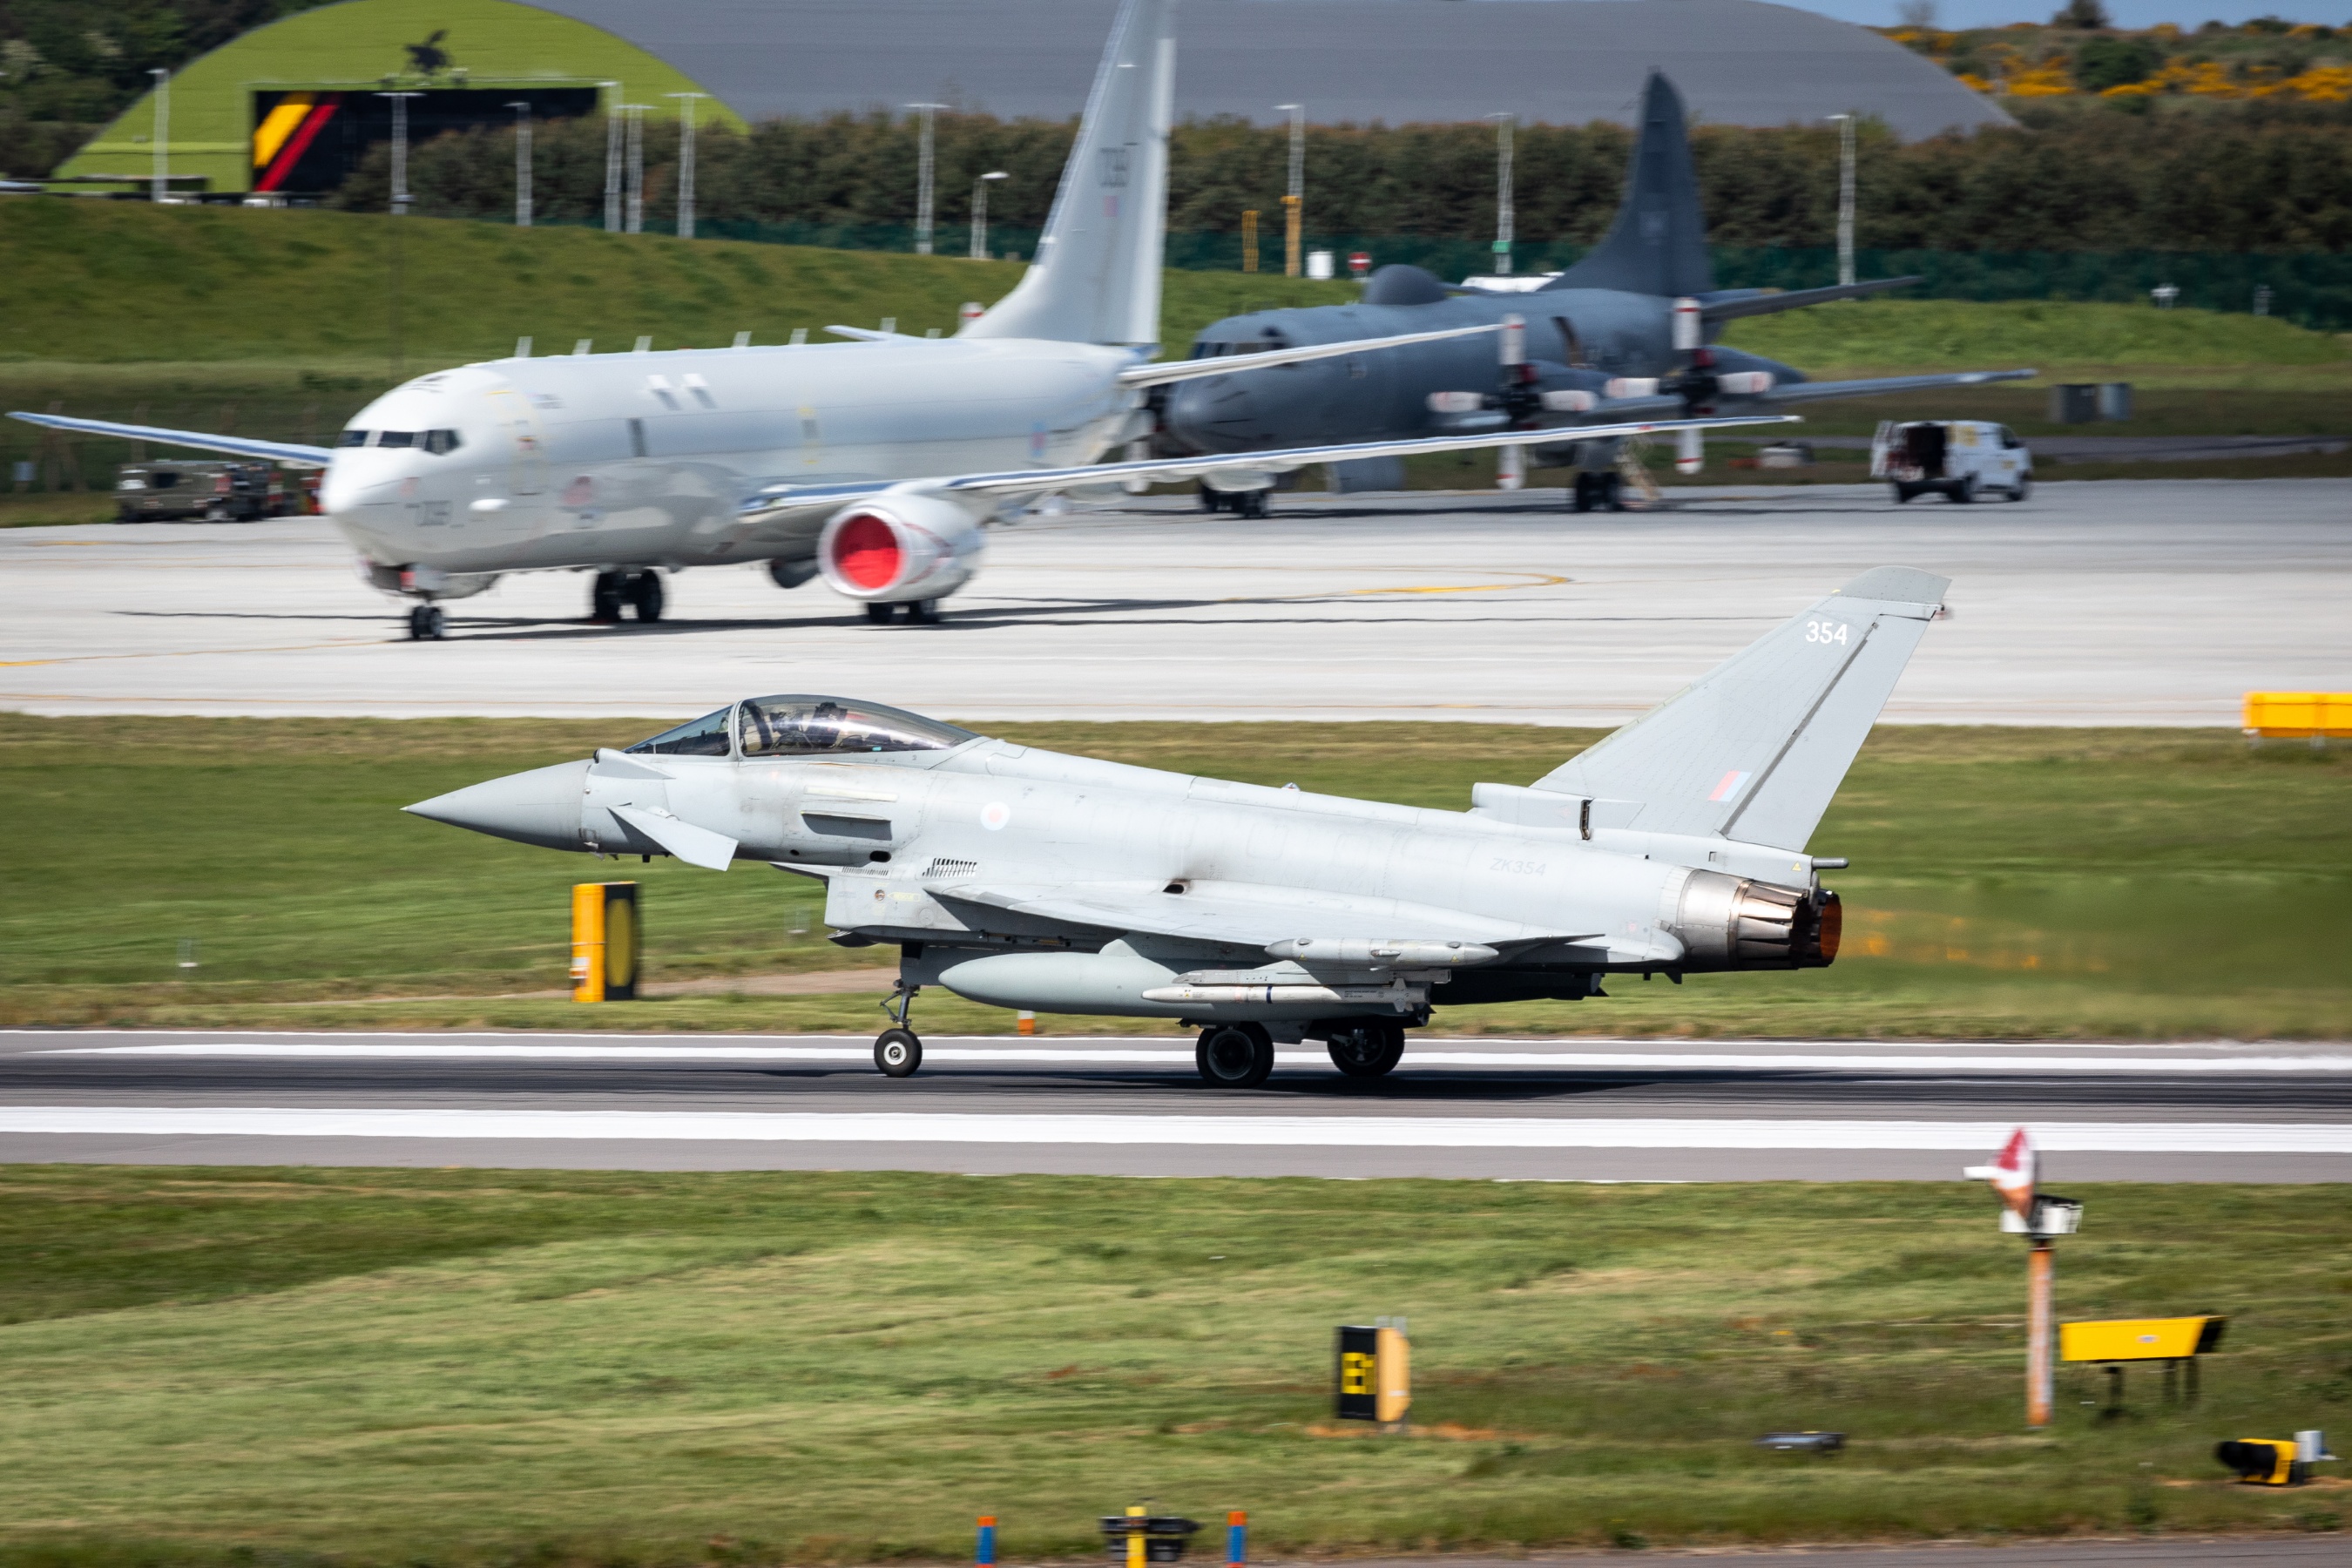 Typhoon taking off, with Atlas carrier aircraft in background.